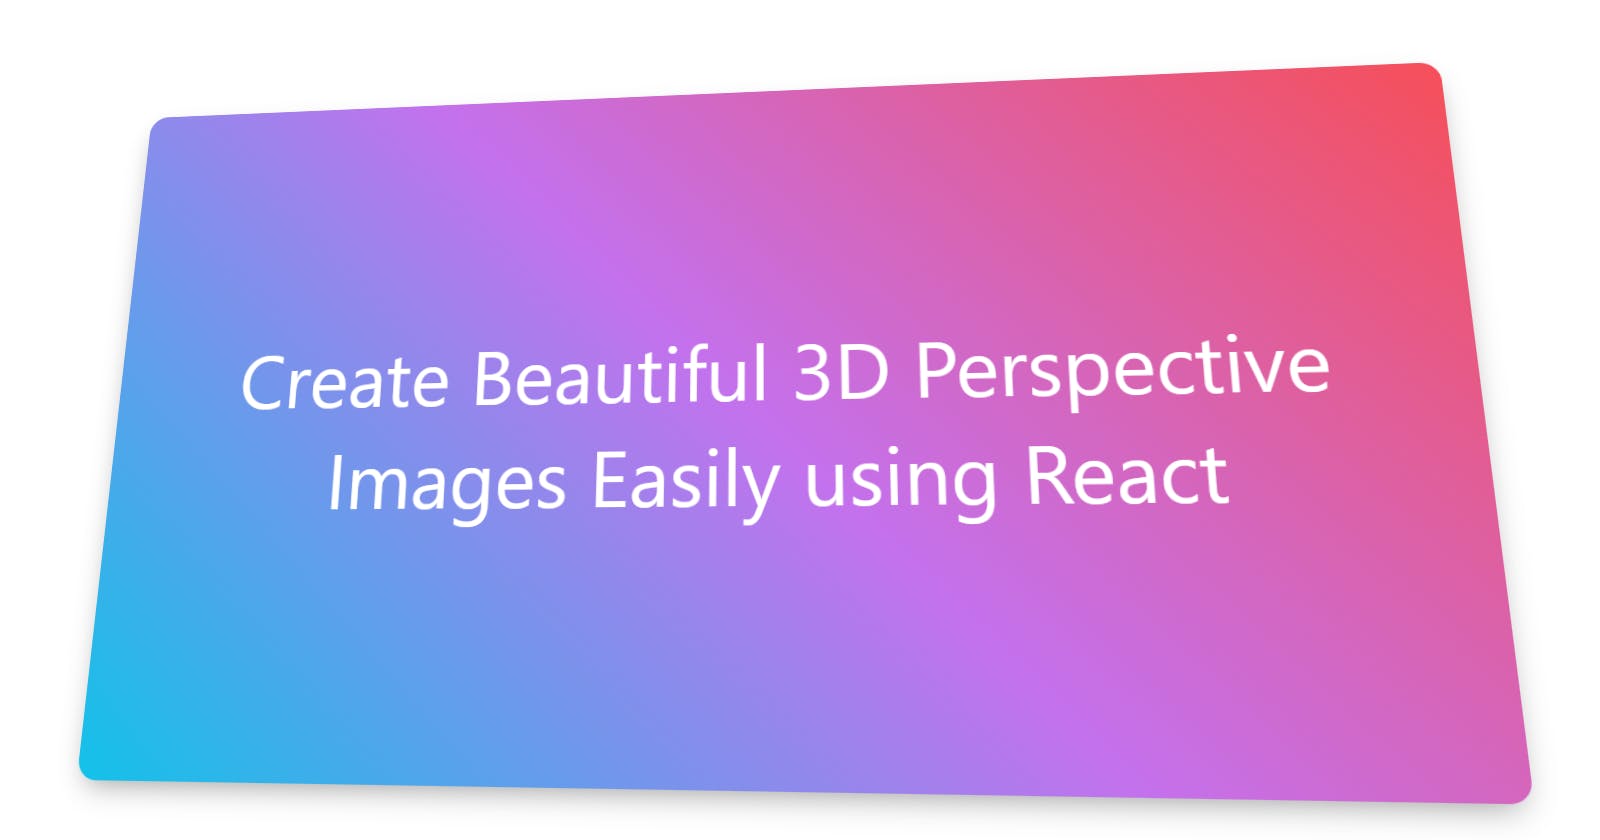 Create Beautiful 3D Perspective Images Easily Using React and CSS